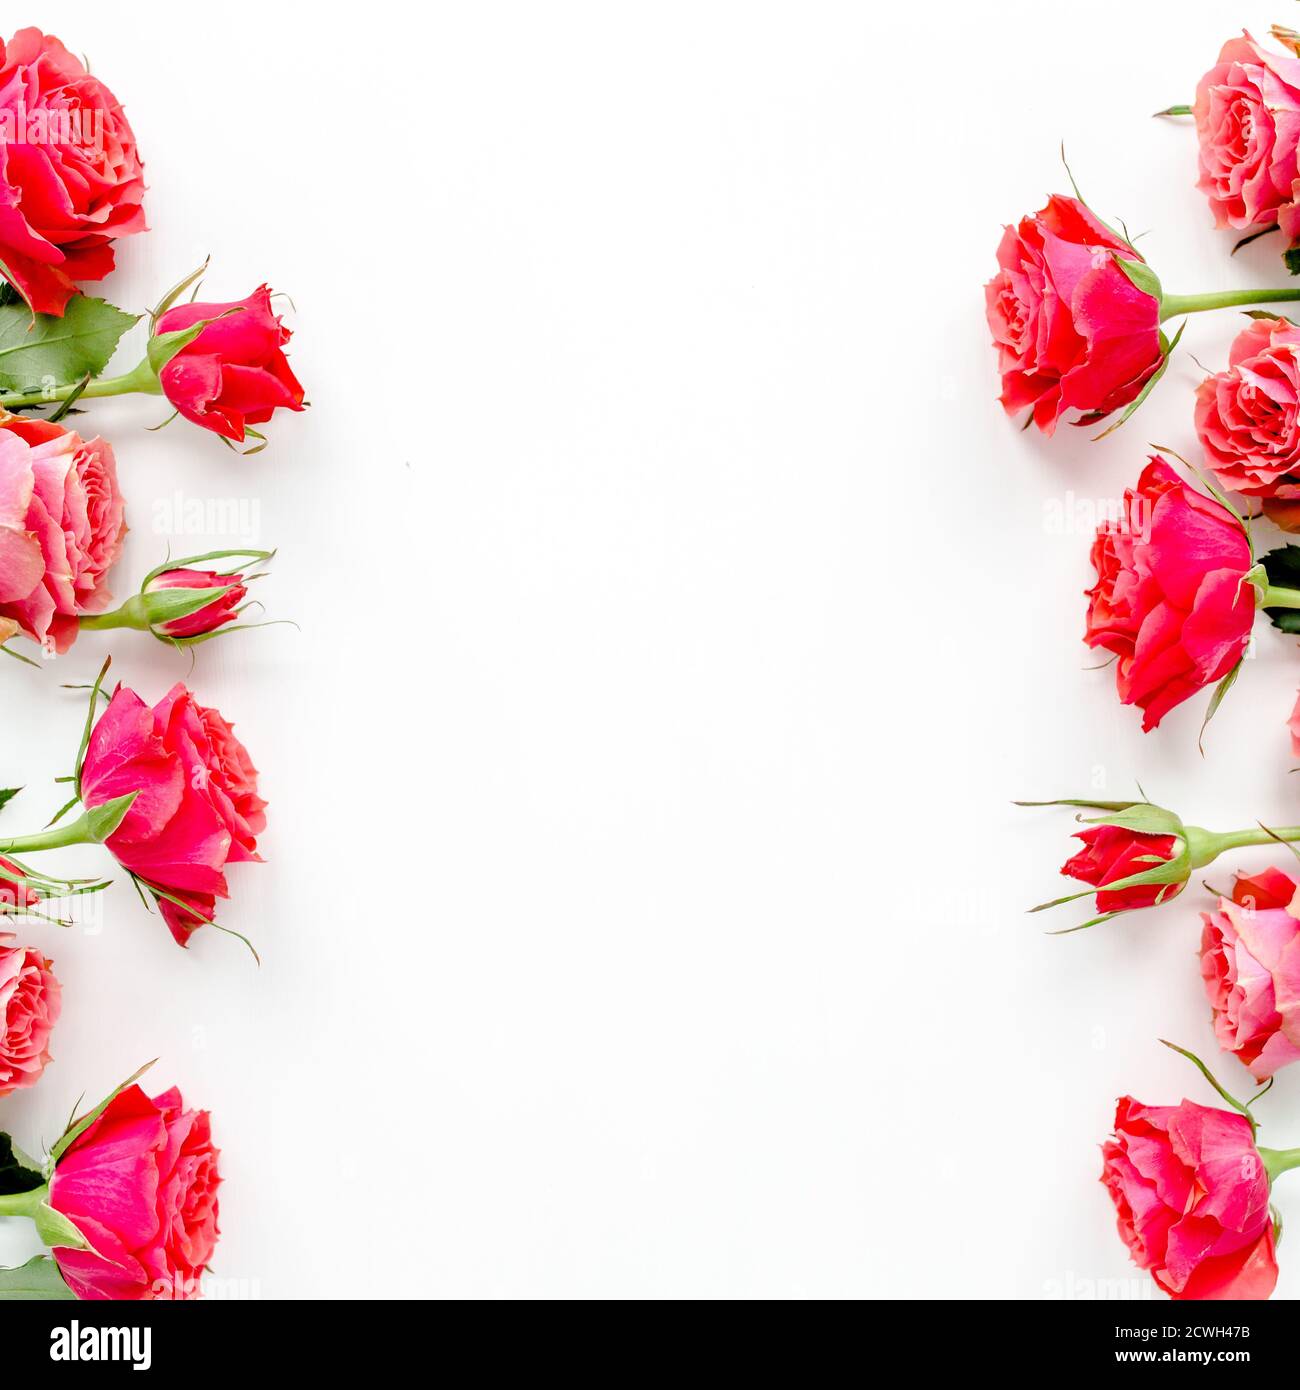 Flower border frame made of red roses on white background with copy space for text. Valentine's background. Floral pattern. Flat lay, top view.  Stock Photo